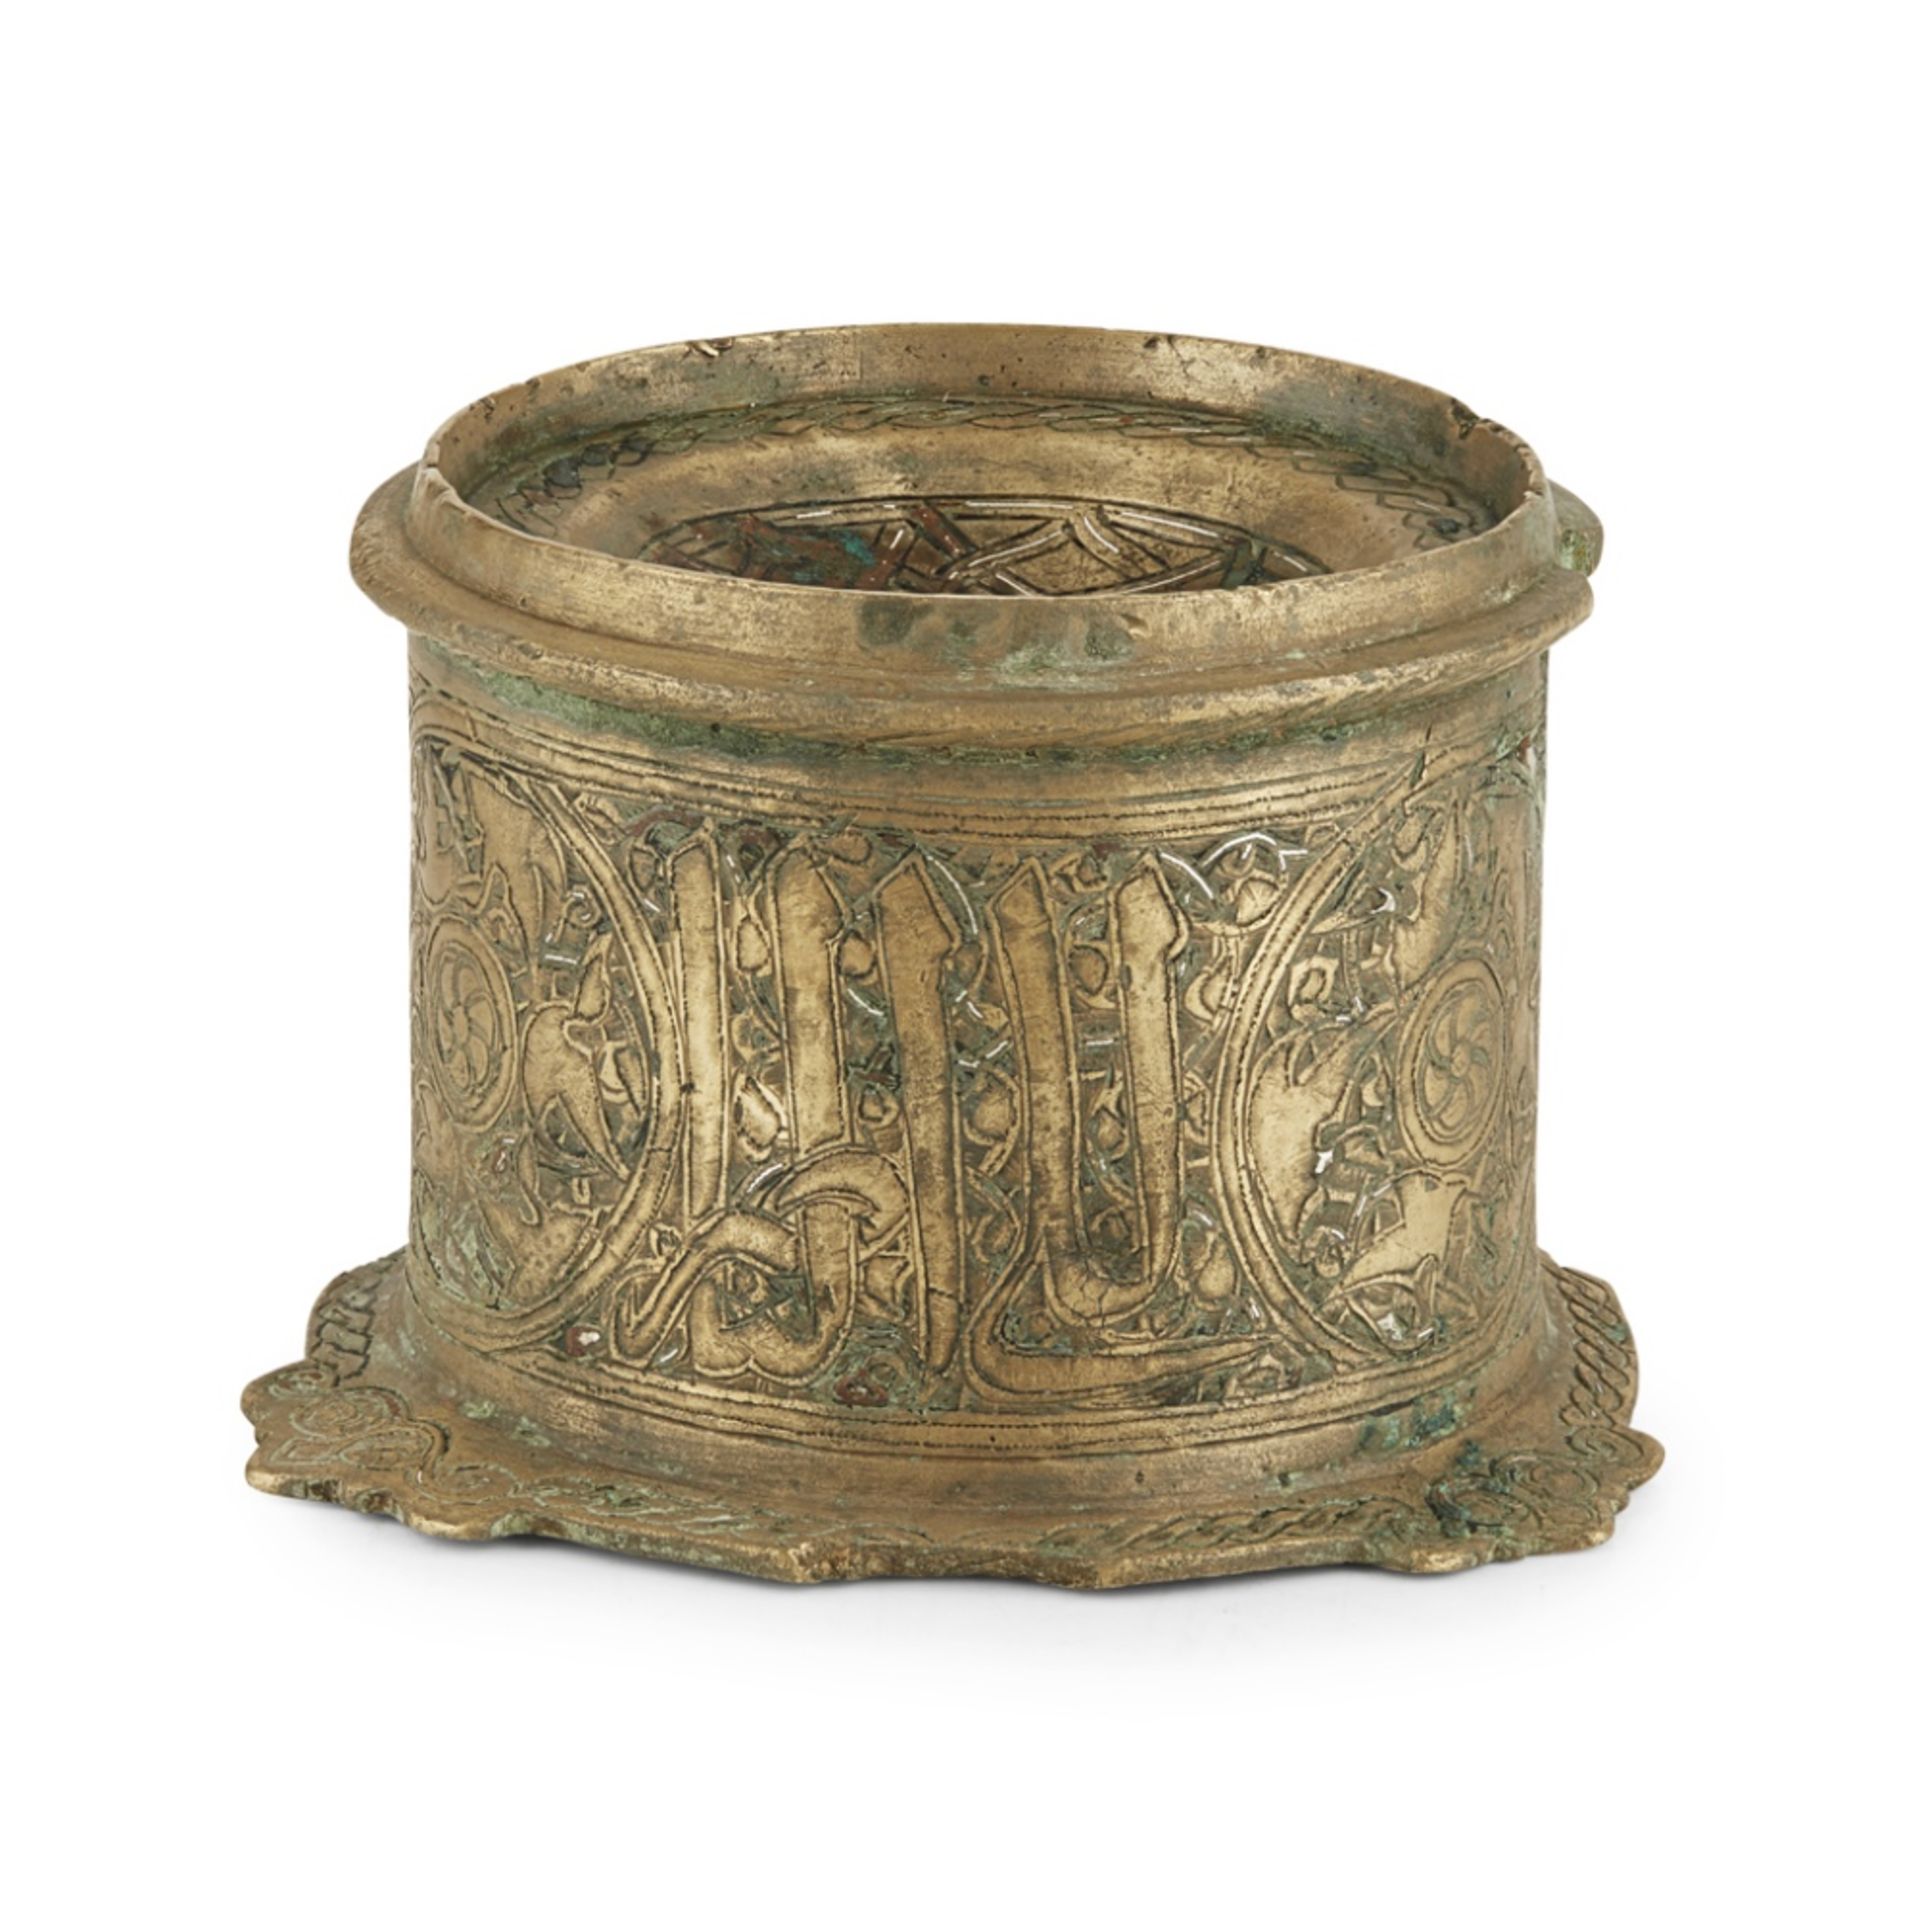 MAMLUK WHITE METAL INLAID BRASS INKWELLEGYPT OR SYRIA, 15TH CENTURY the concave well engraved with a